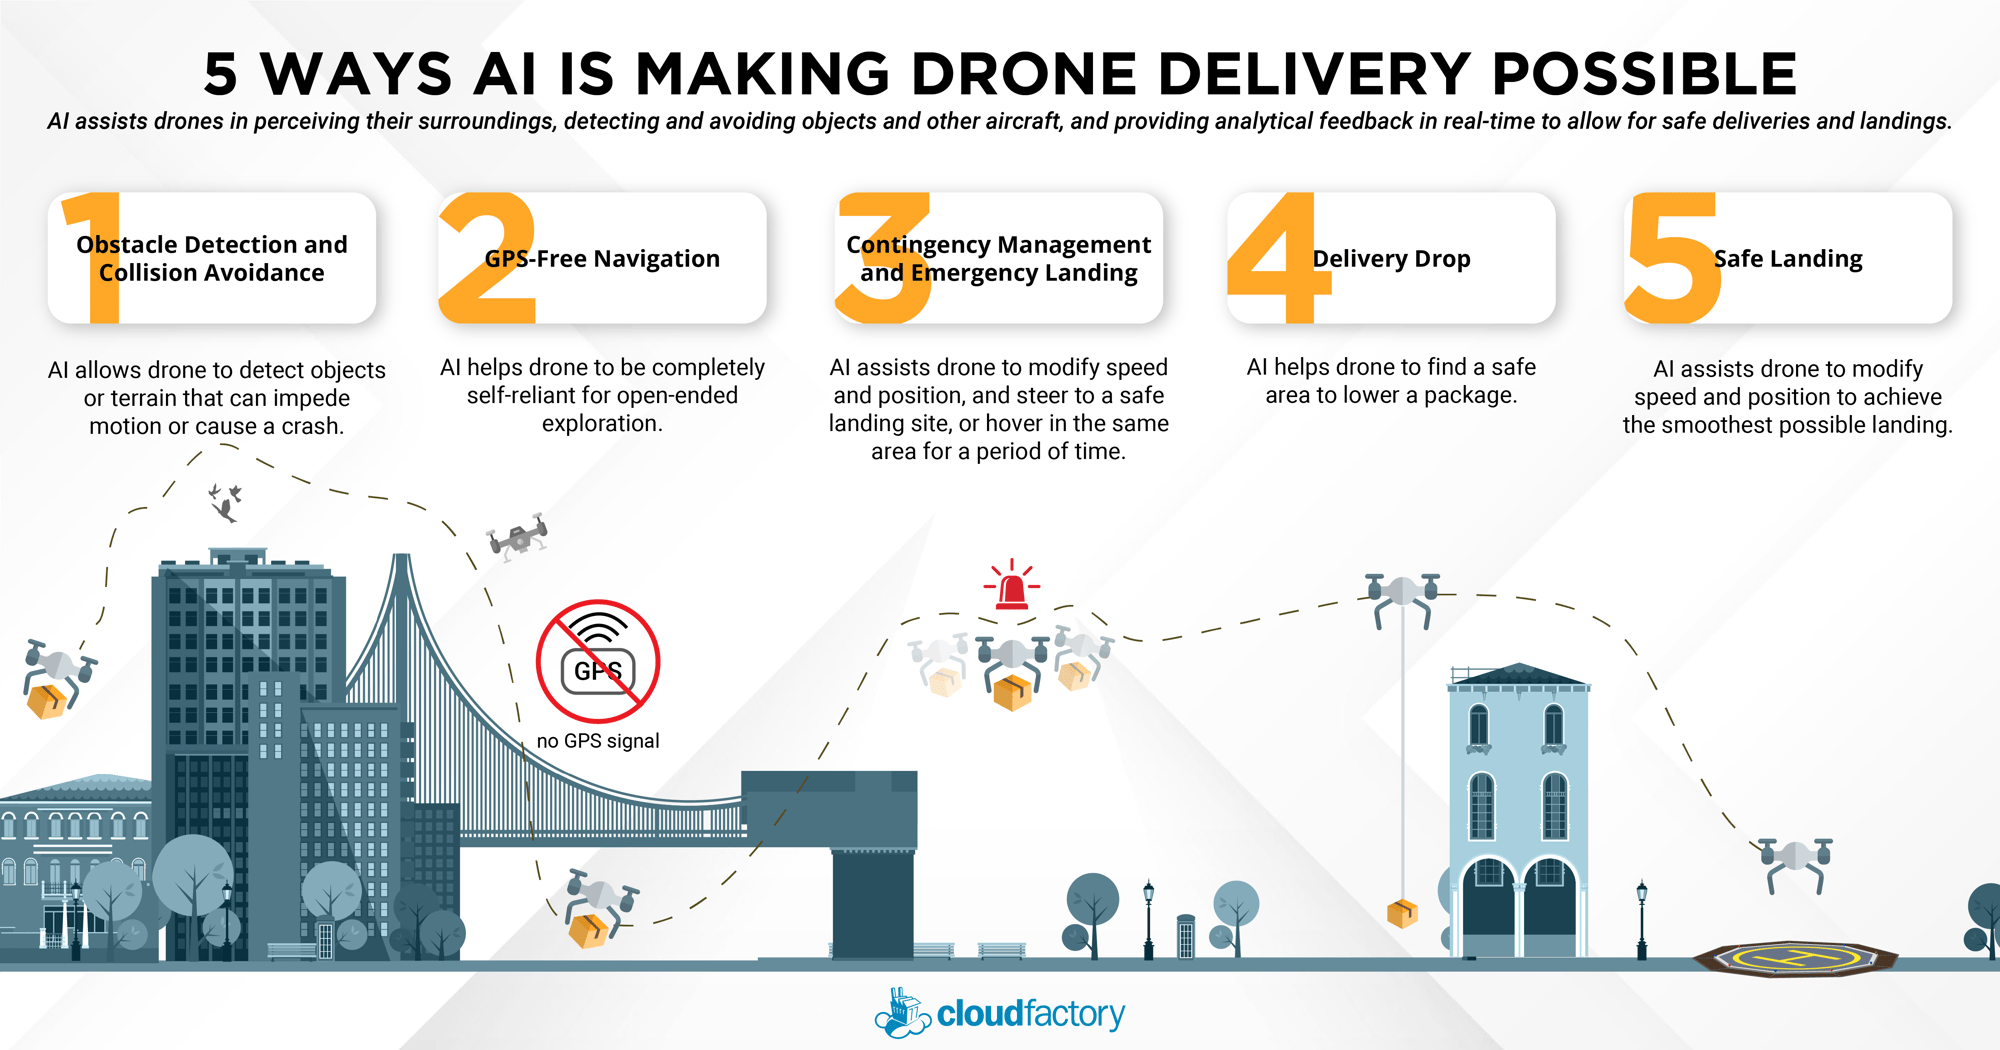 5 Ways AI is Making Drone Delivery Possible - AI will assist drone delivery operators with five key applications: Obstacle detection and avoidance, GPS-free navigation, contingency management and emergency landings, delivery drop, and safe landings.